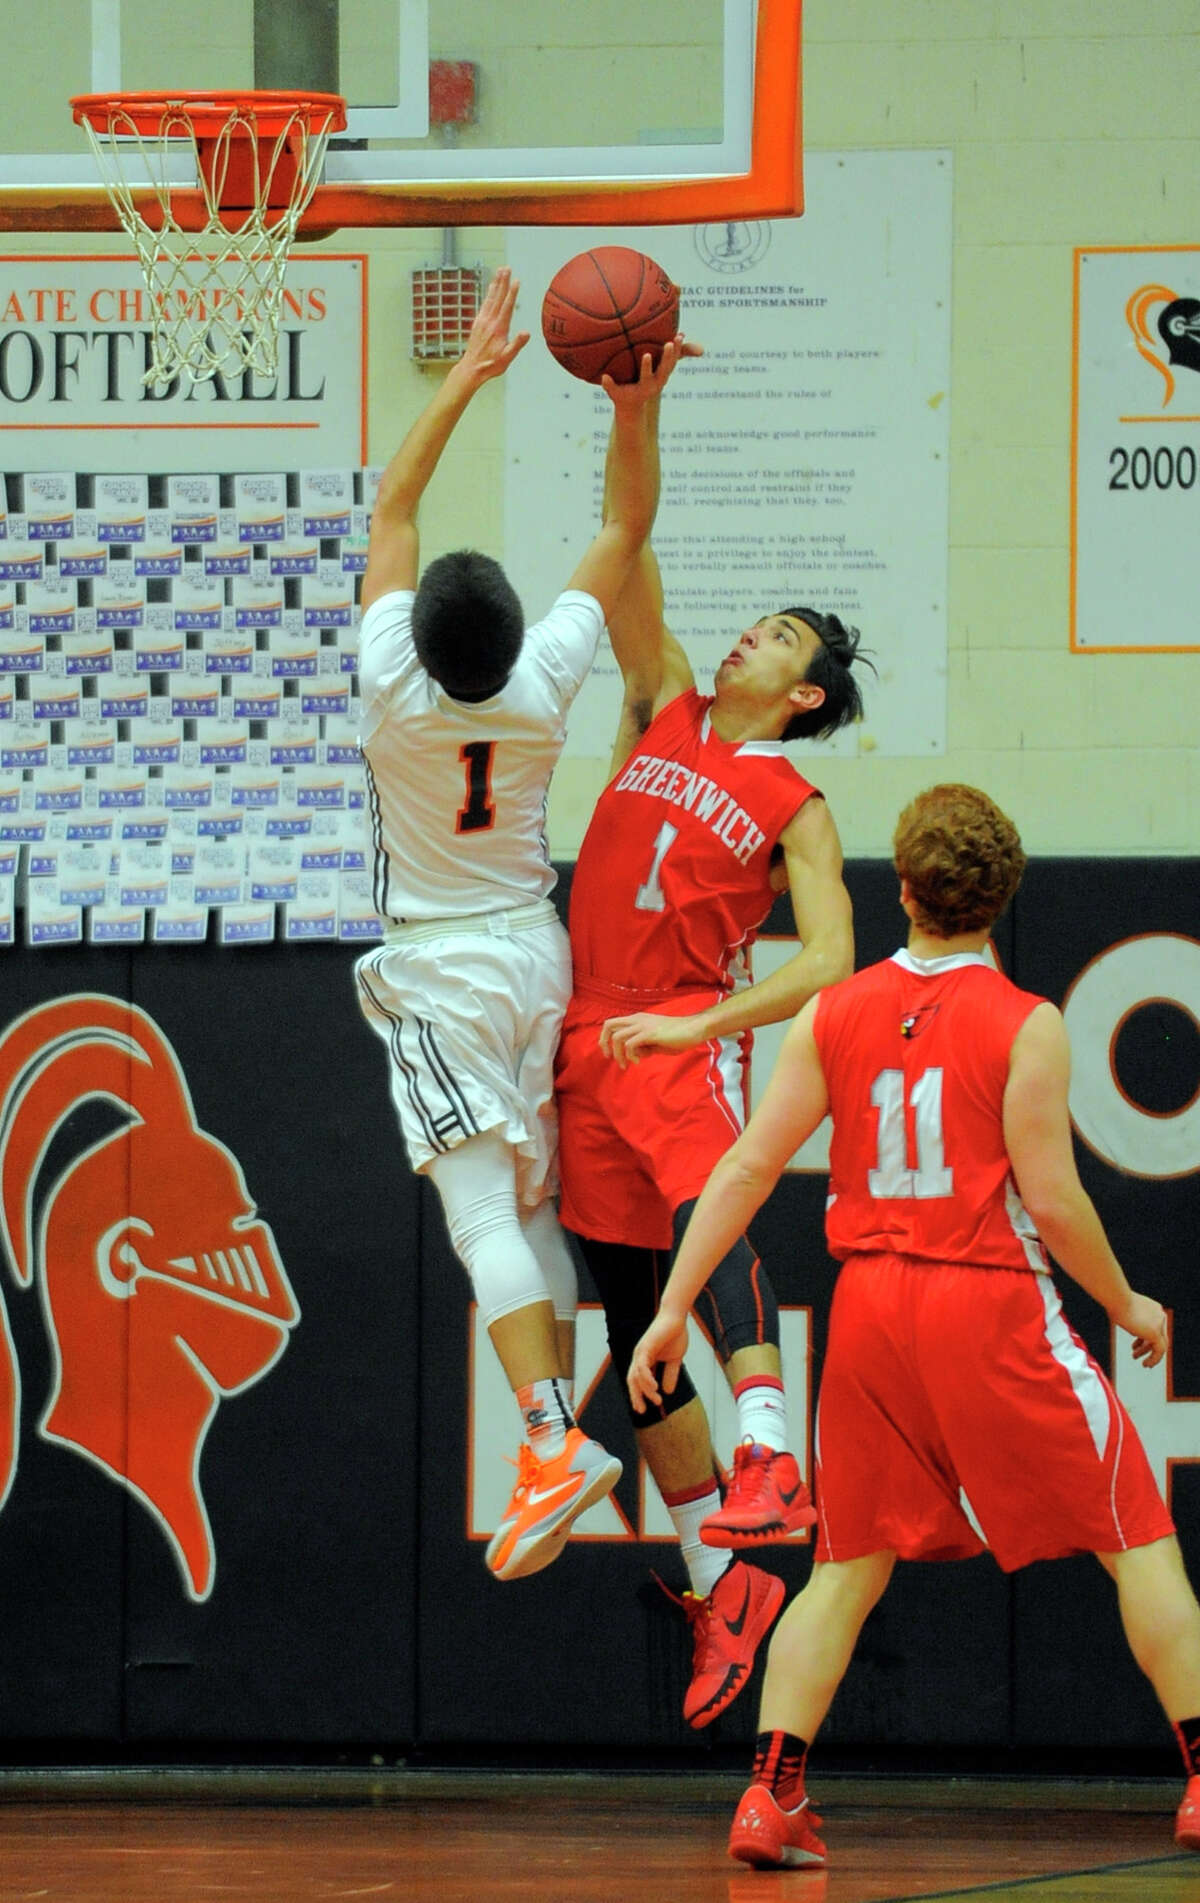 Greenwich's Michael Gianopoulos blocks the shot of Stamford's Nico Laveris in the first half Wednesday in Stamford.